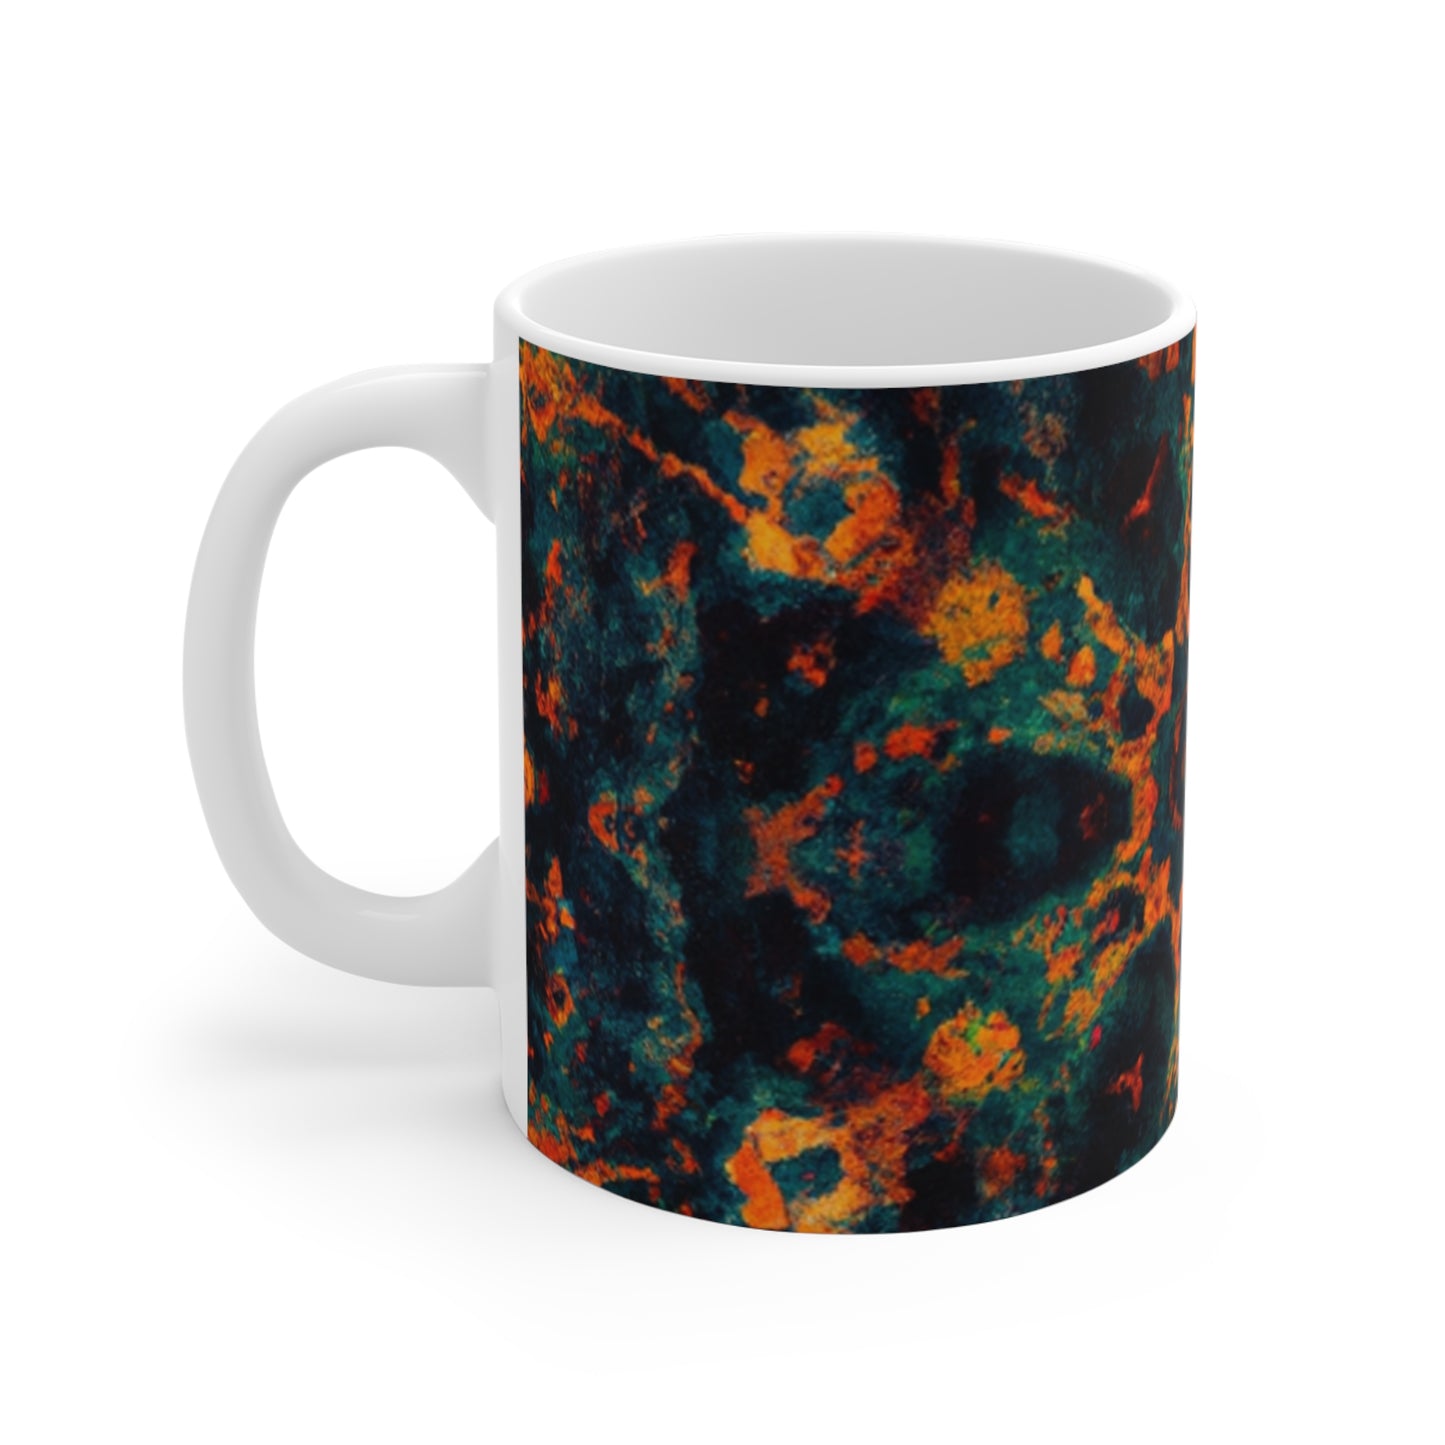 first name

Norman's Coffee - Psychedelic Coffee Cup Mug 11 Ounce